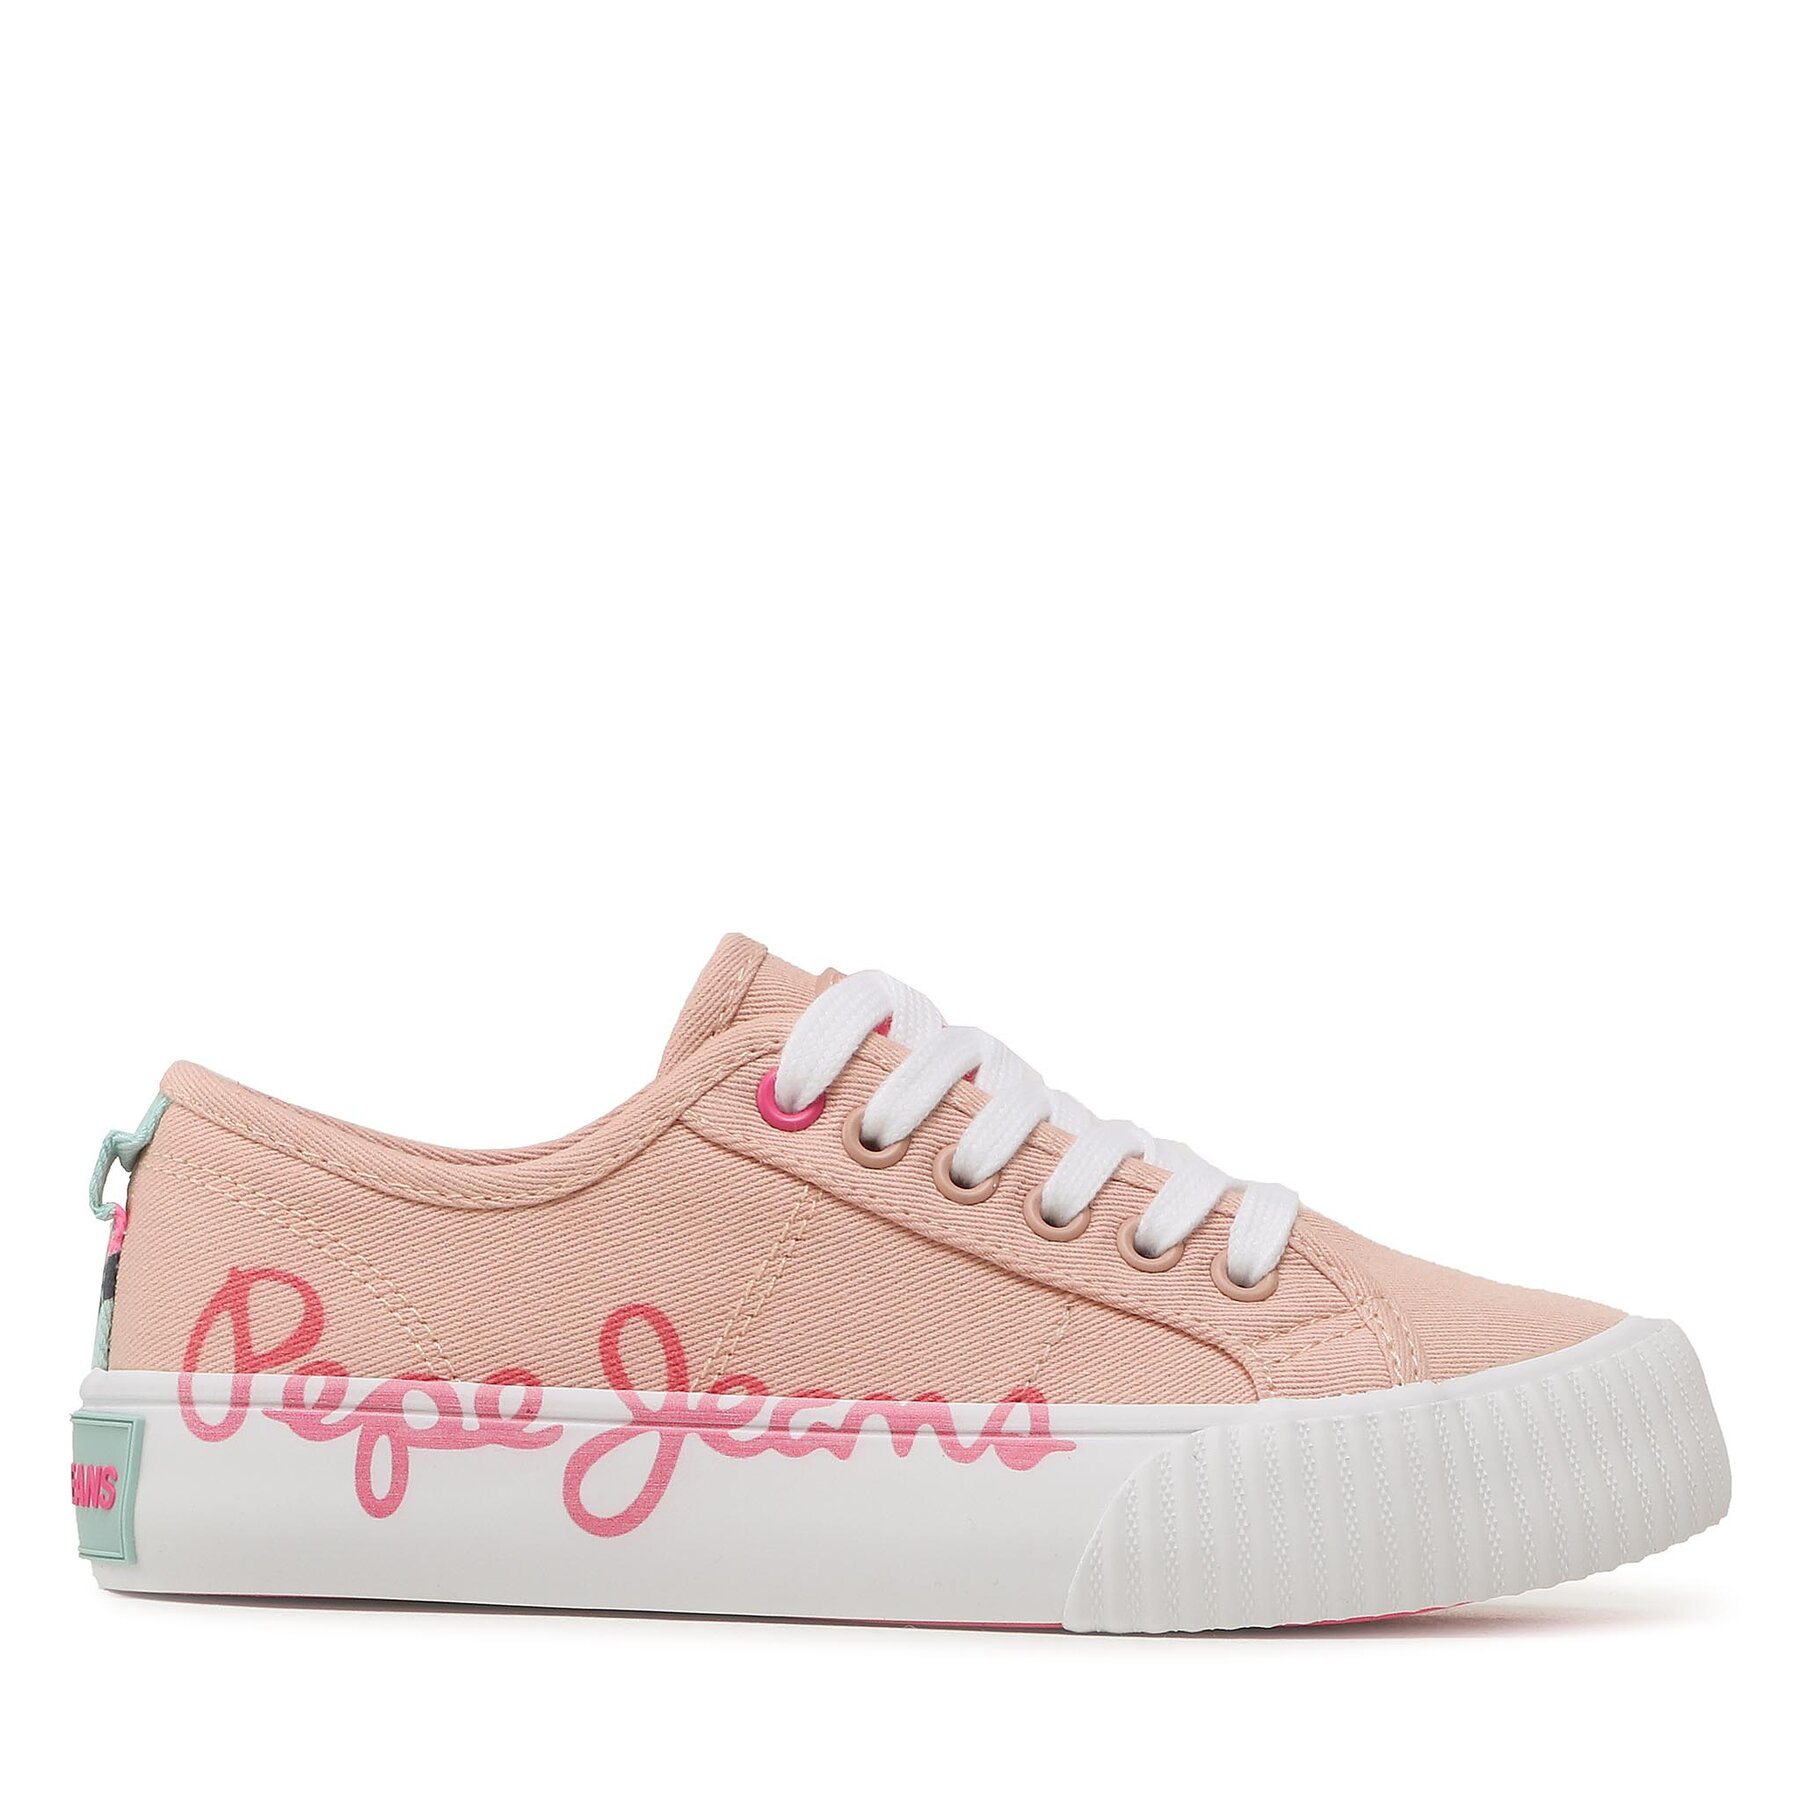 Sneakers Pepe Jeans Ottis Log G PGS30577 Powder Rose 318 von Pepe Jeans